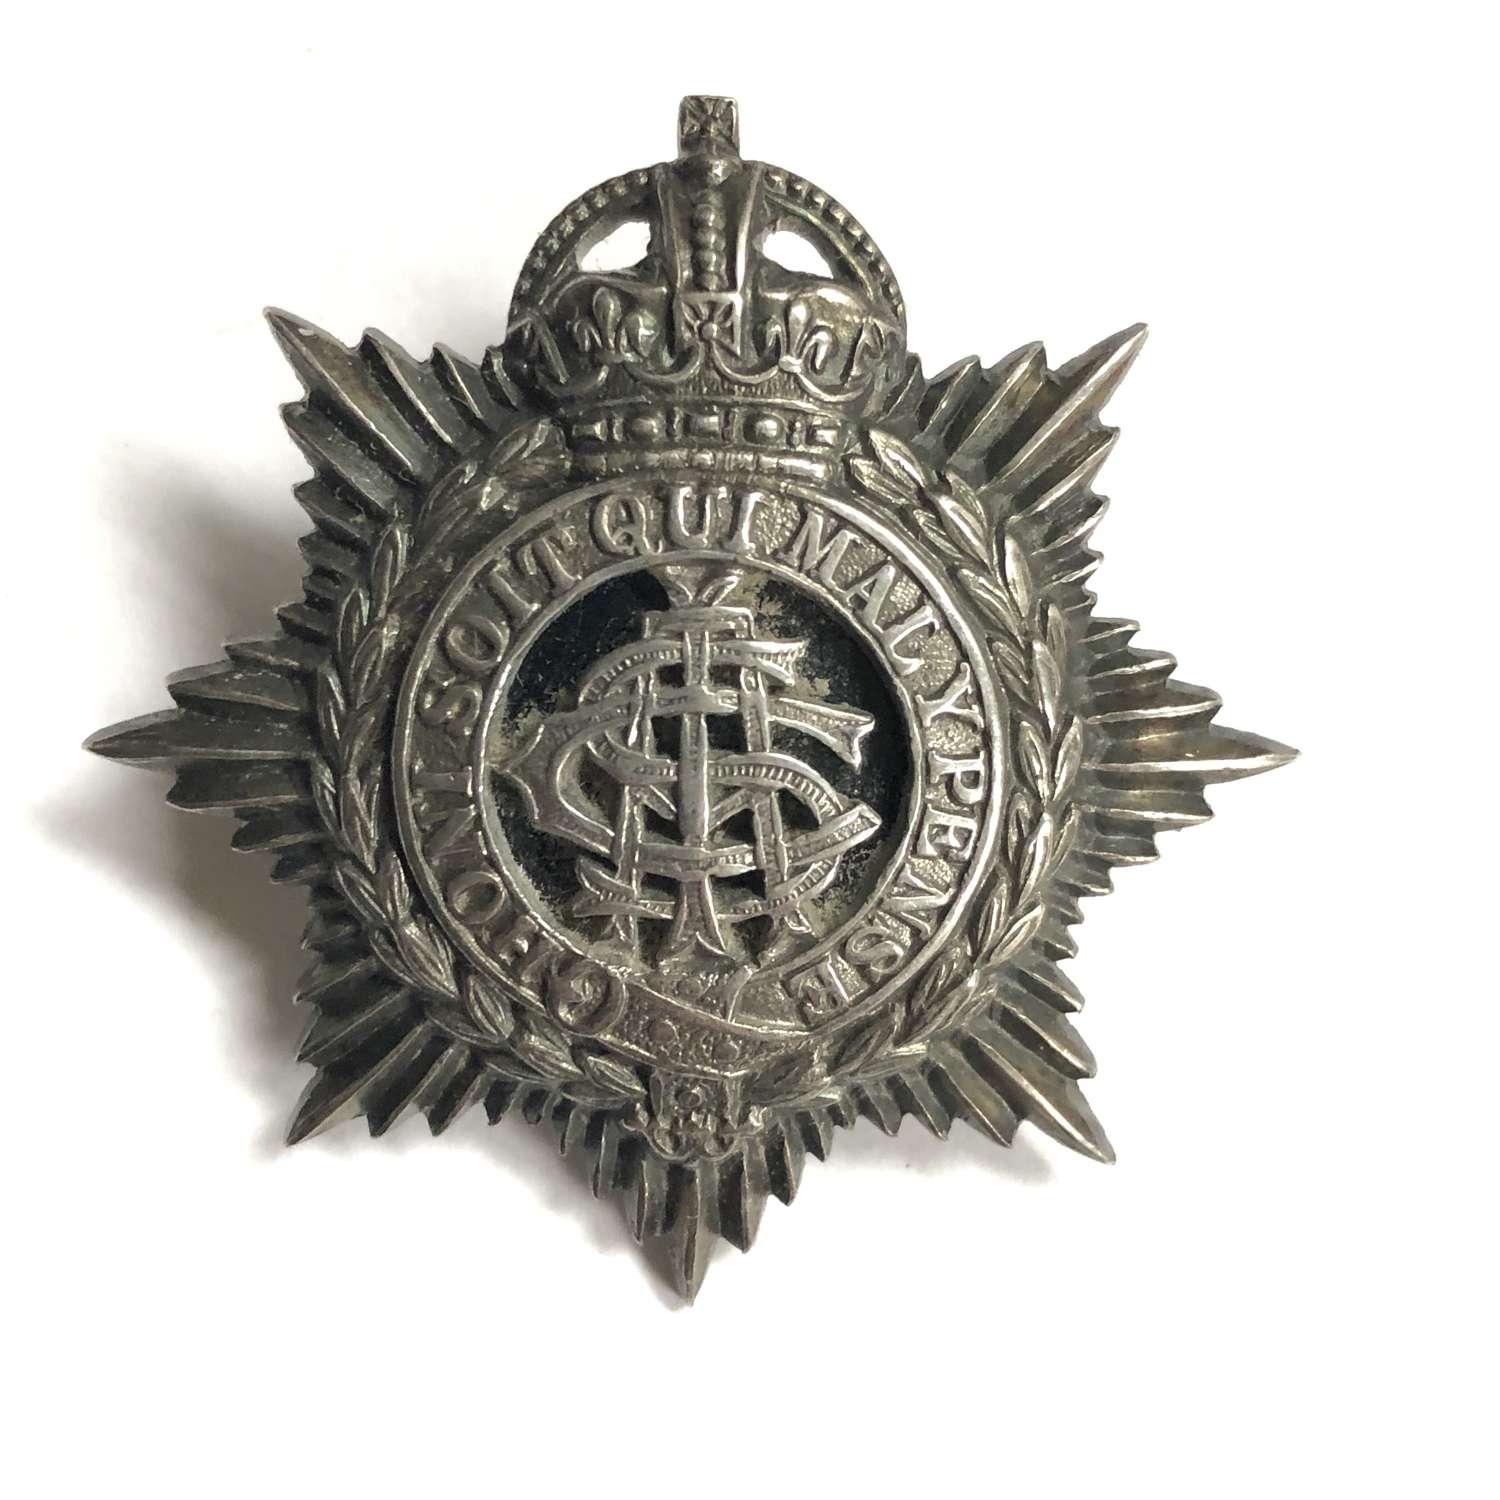 Indian Army Service Corps Officer's cap badge circa 1923-35